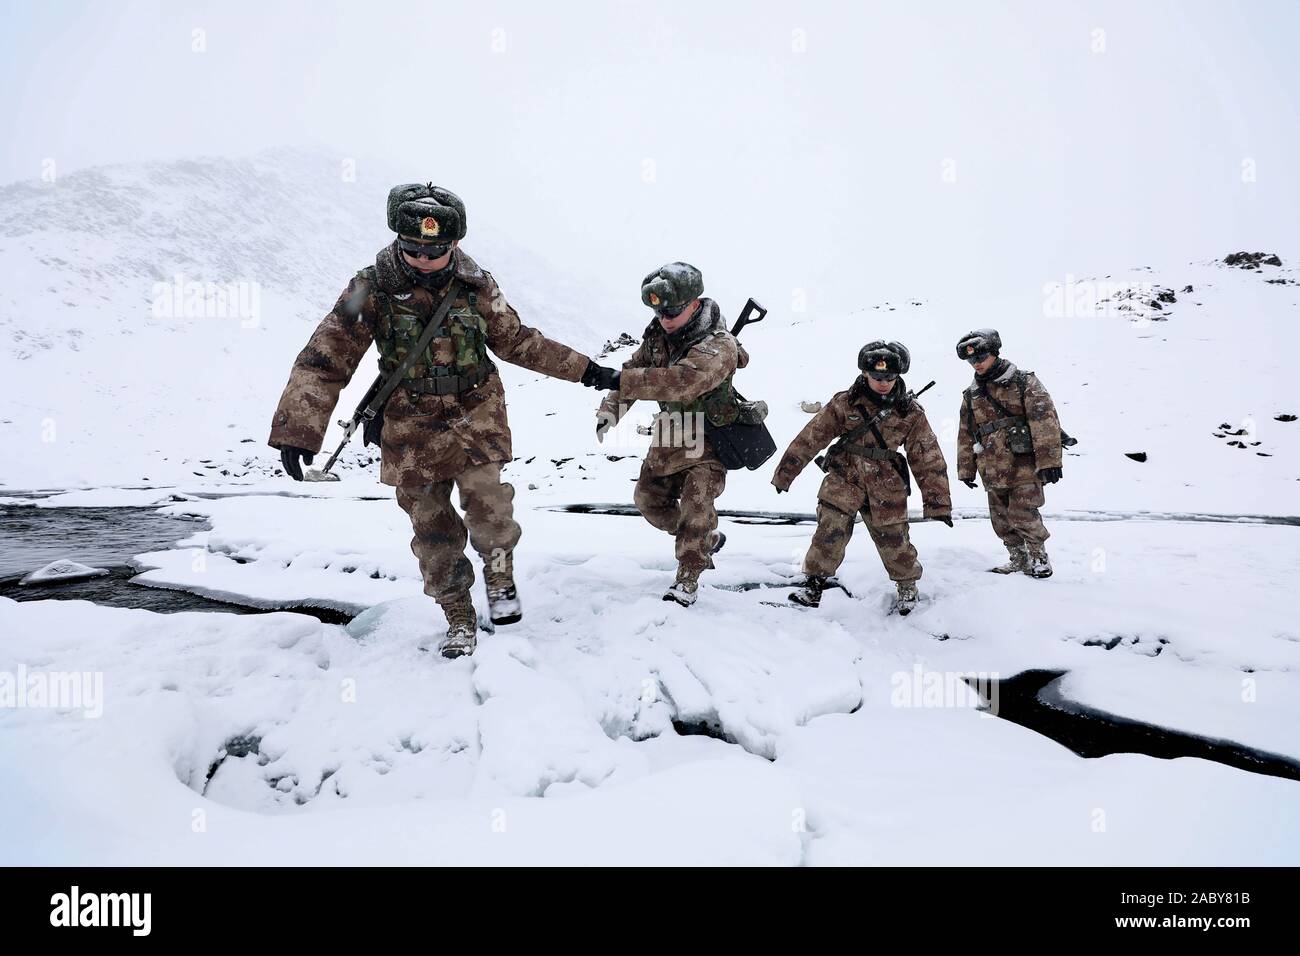 chinese-pla-peoples-liberation-army-soldiers-patrol-the-snow-blanketed-border-on-their-last-duty-before-retirement-on-the-pamirs-plateau-in-northwe-2ABY81B.jpg